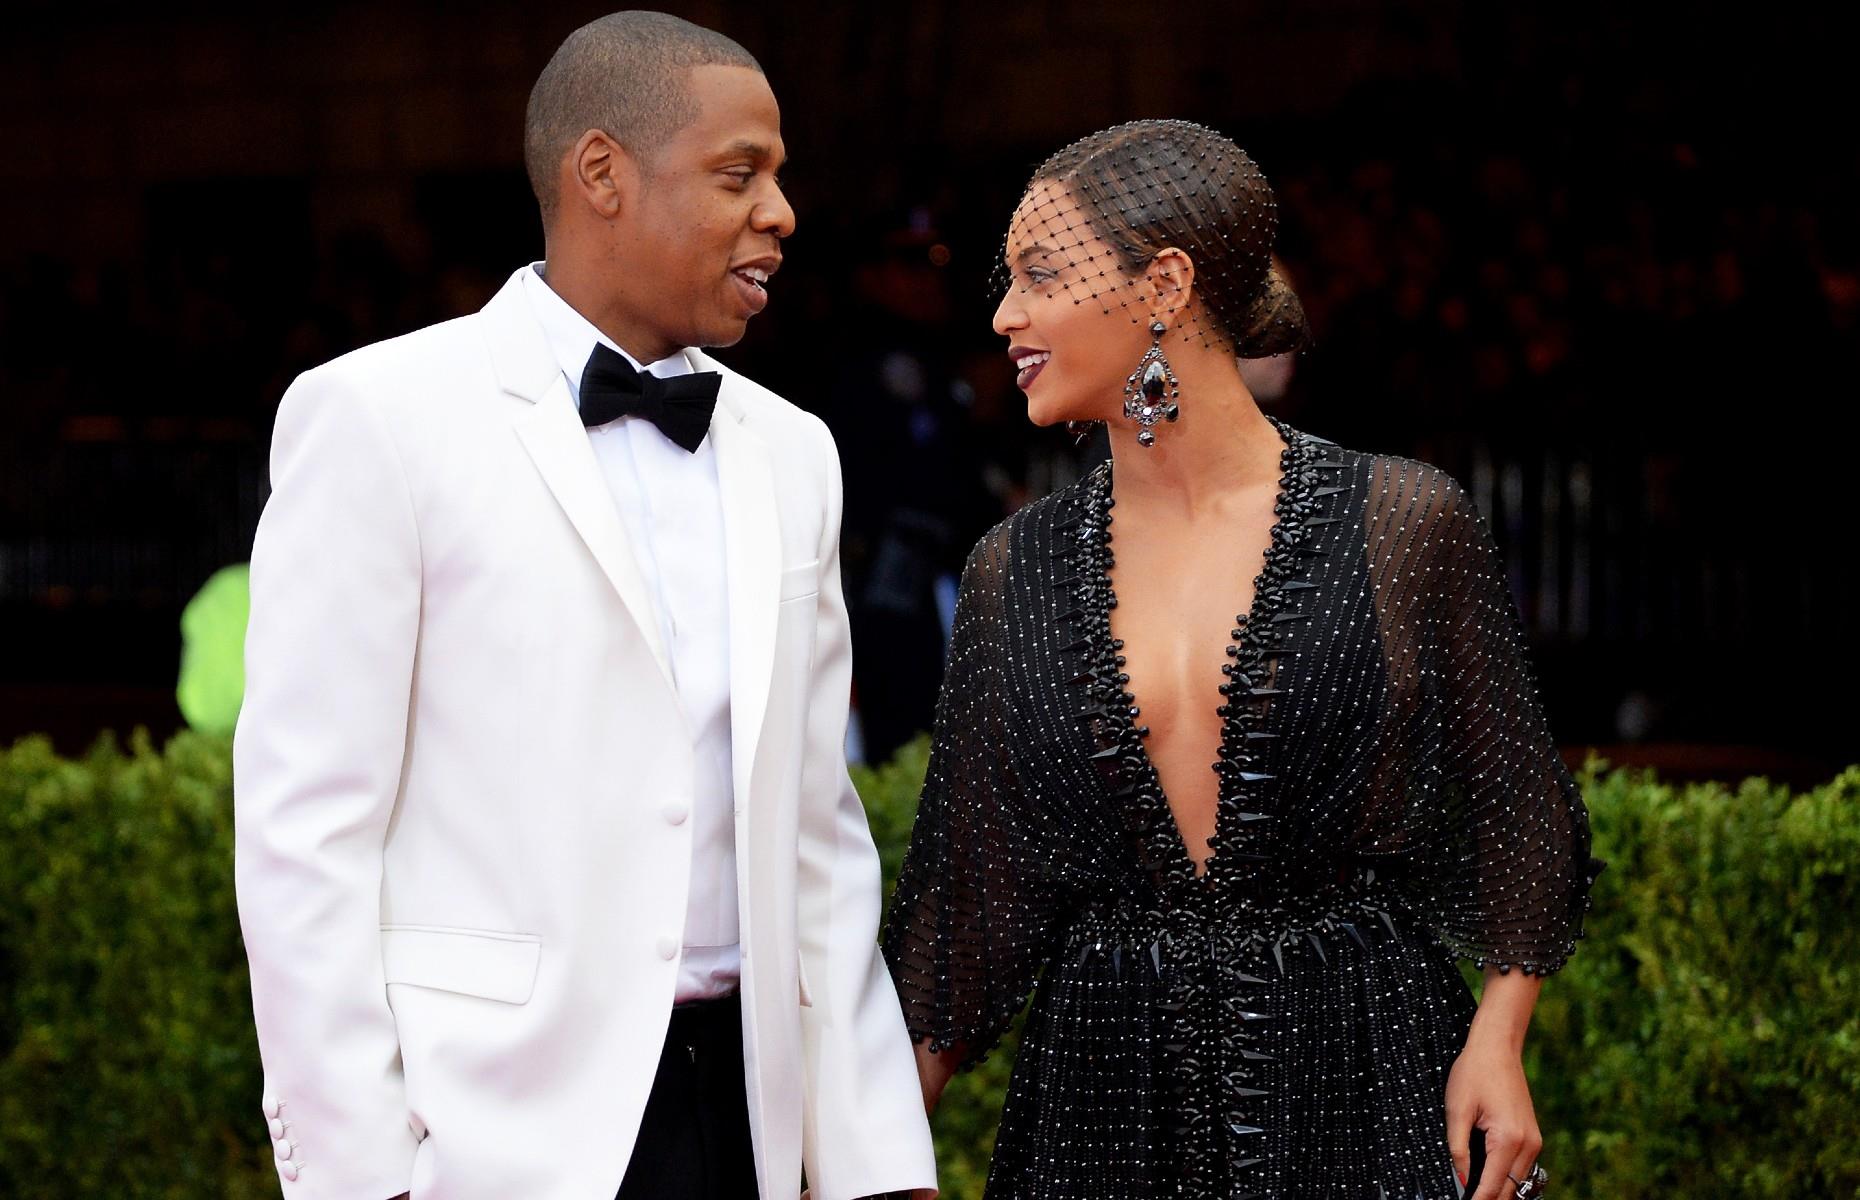 <p>Bling aside, Beyoncé and Jay-Z also donate a lot of money to charity. Beyoncé donated $100,000 to historically Black colleges, and her charity BeyGOOD, which tackles gender inequality and provides natural disaster relief, pledged $6 million in support of mental health during the COVID-19 pandemic.</p>  <p>Jay-Z founded his own charity, the Shawn Carter Foundation, with his mother Gloria. The organization raised $6 million in aid of disadvantaged students in 2019. </p>  <p><strong>Now take a look at some more <a href="https://www.lovemoney.com/news/54884/celebrities-making-a-fortune-from-their-business-interests">celebrities making a fortune from their business interests</a> </strong></p>